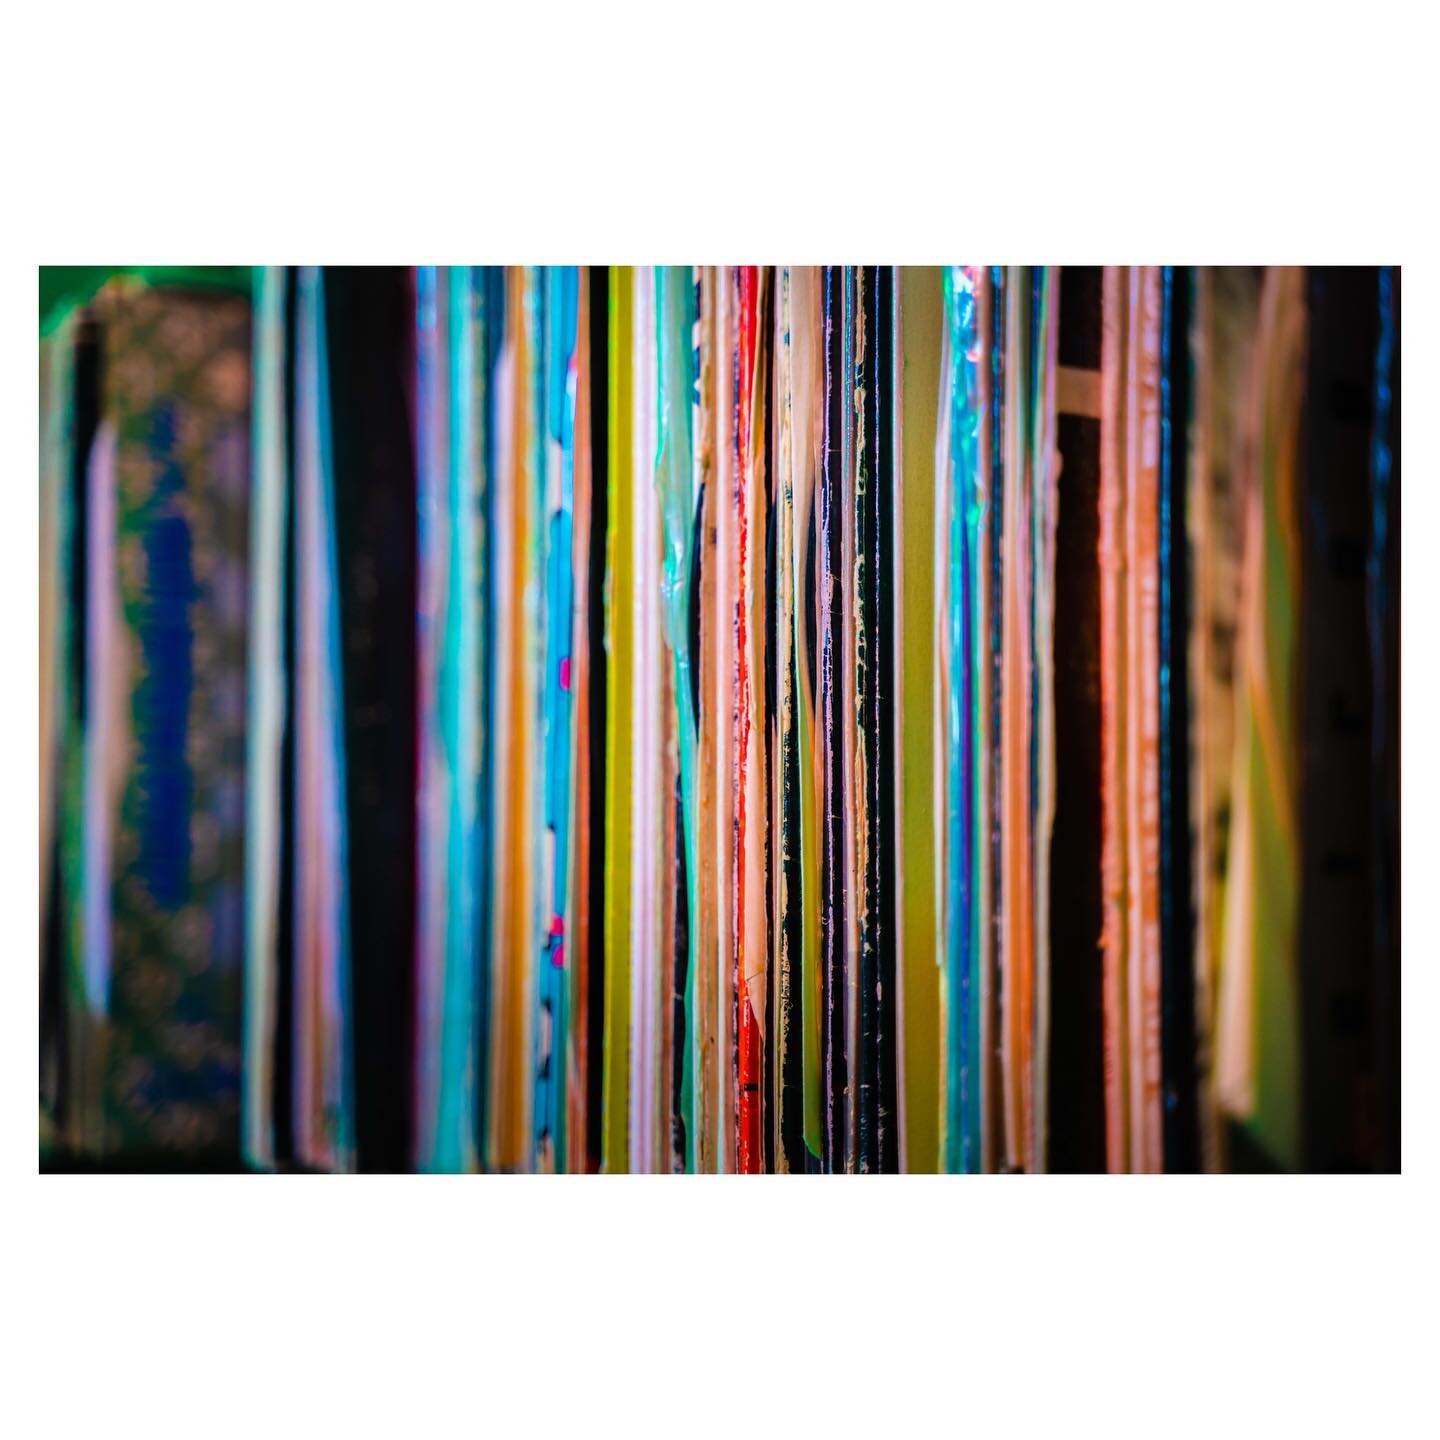 a very colorful and photogenic vinyl collection
&bull;
&bull;
&bull;
&bull;
#sonyalpha #sonya #sony #photography #photooftheday #sonyphotography #portrait #sonyimages #emount #photographer #bealpha #photo #picoftheday #portraits #rii #sonyphotography